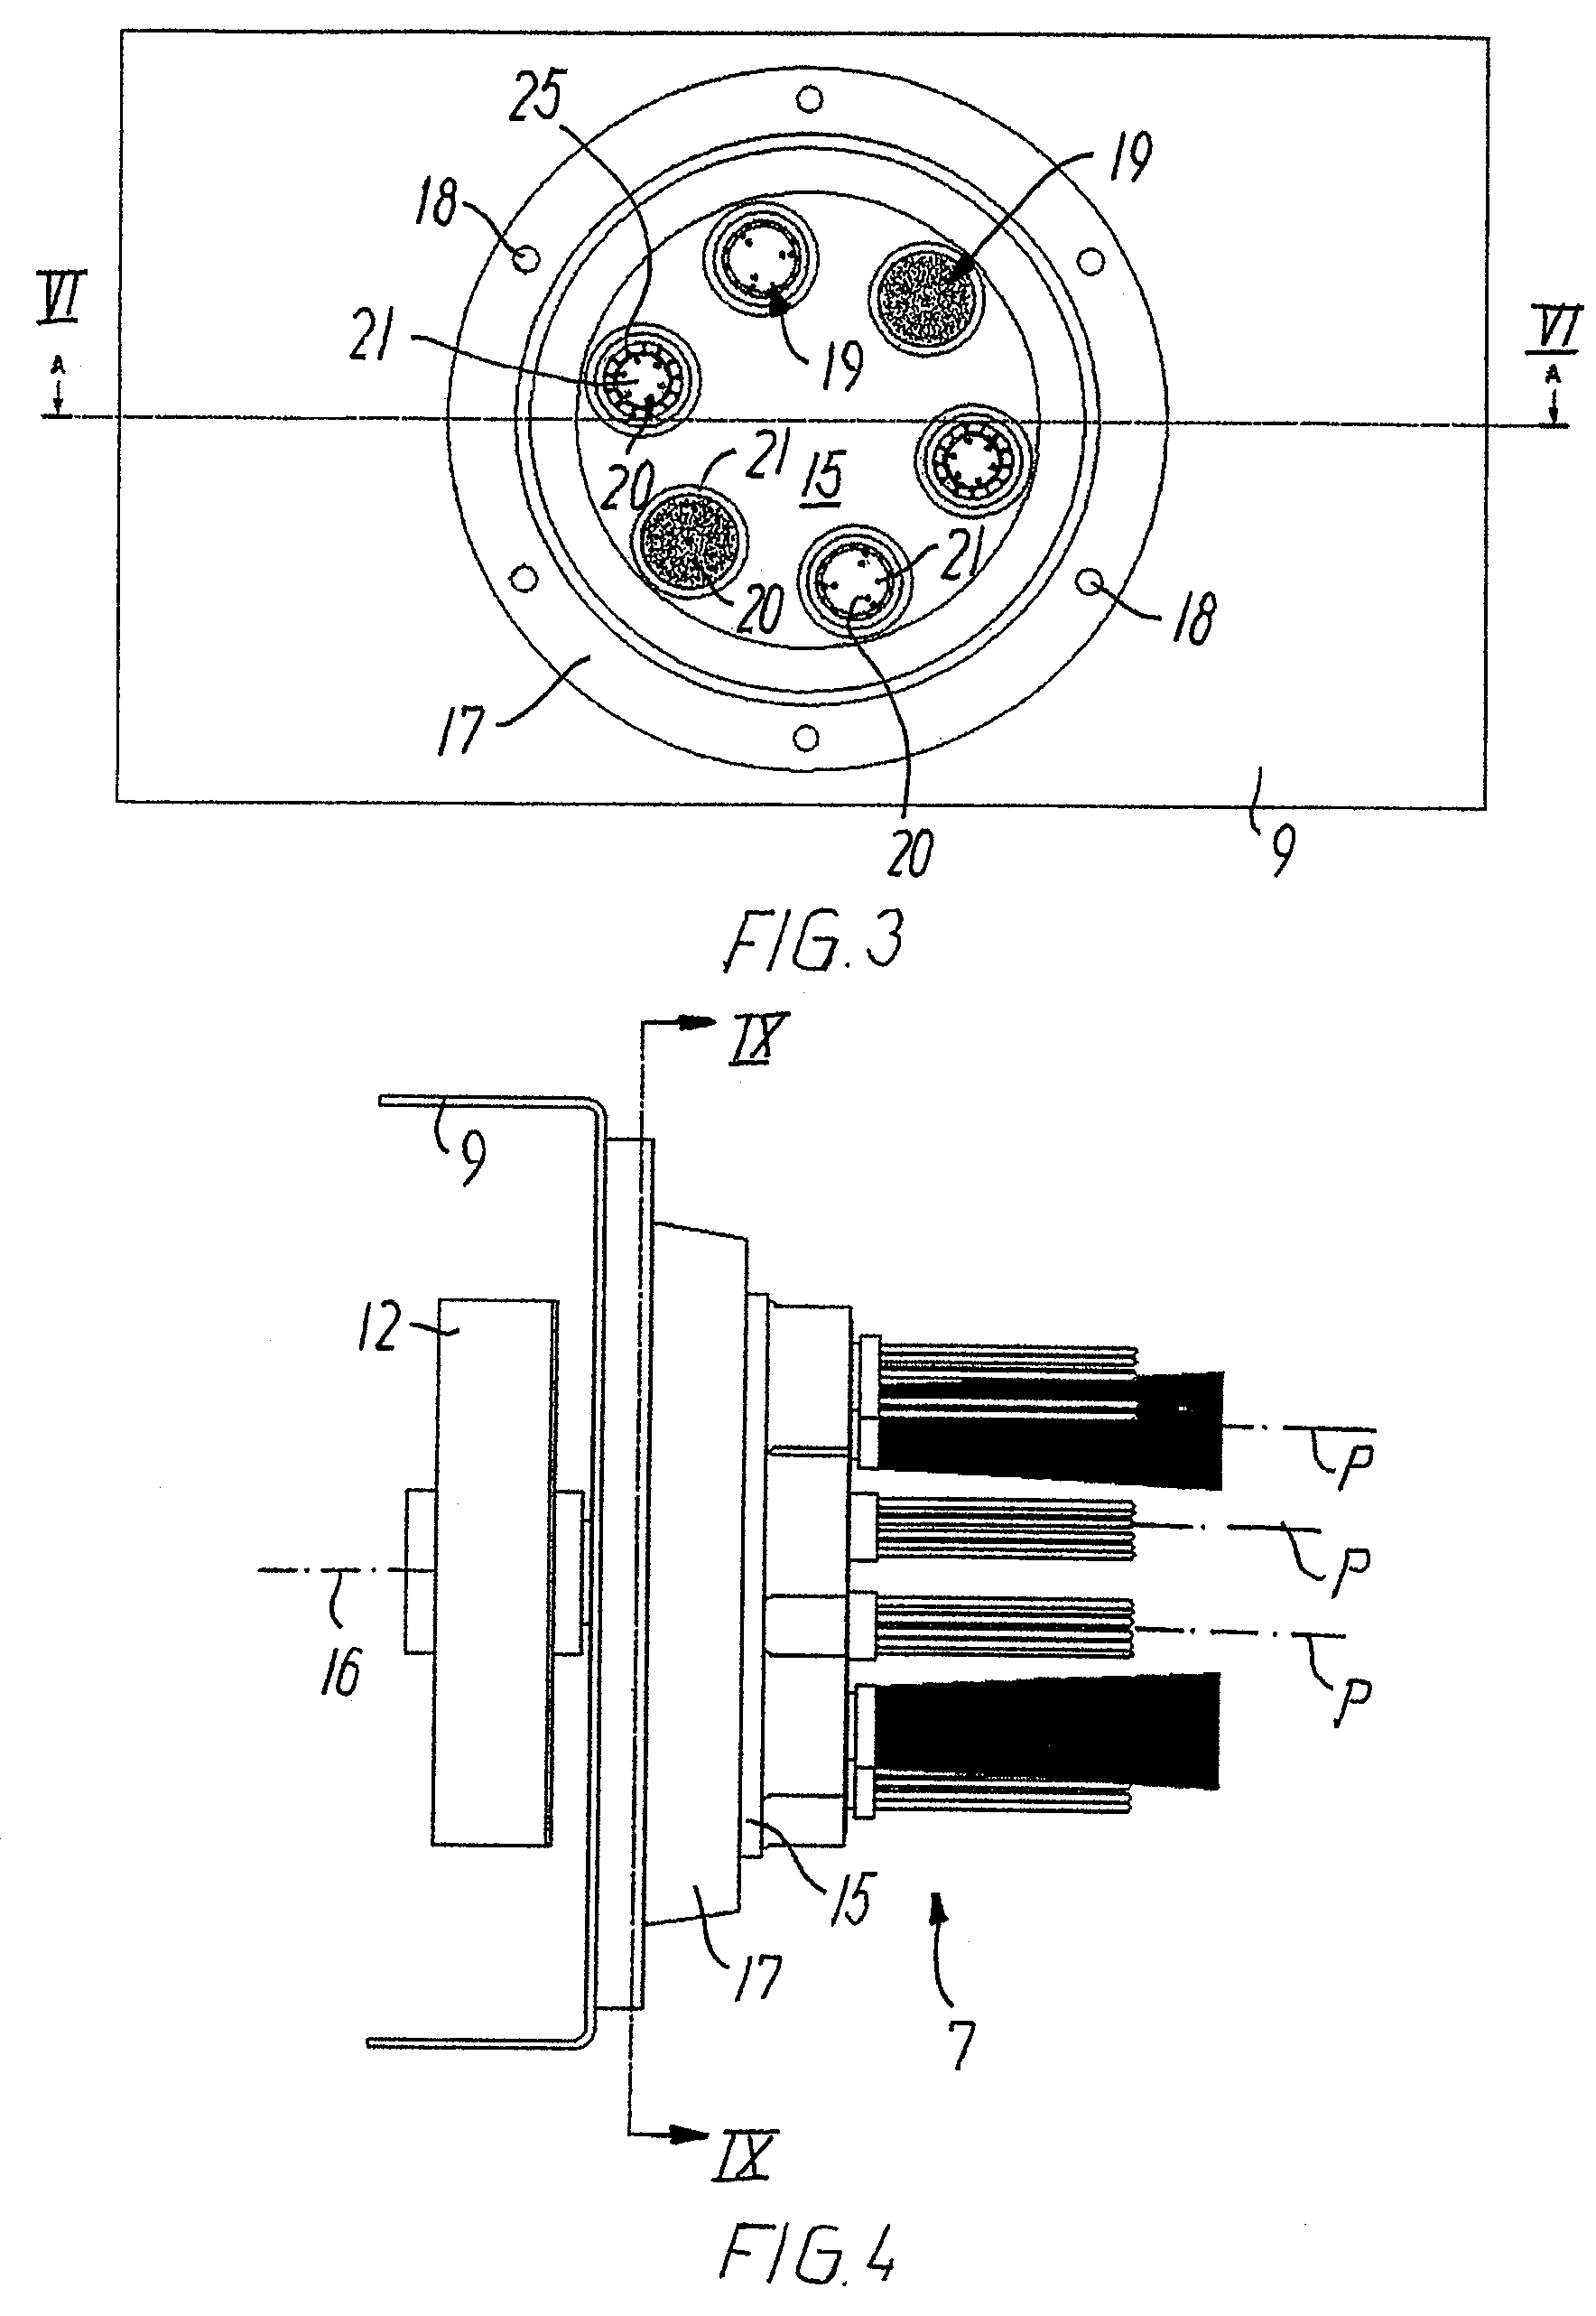 Poultry defeathering apparatus